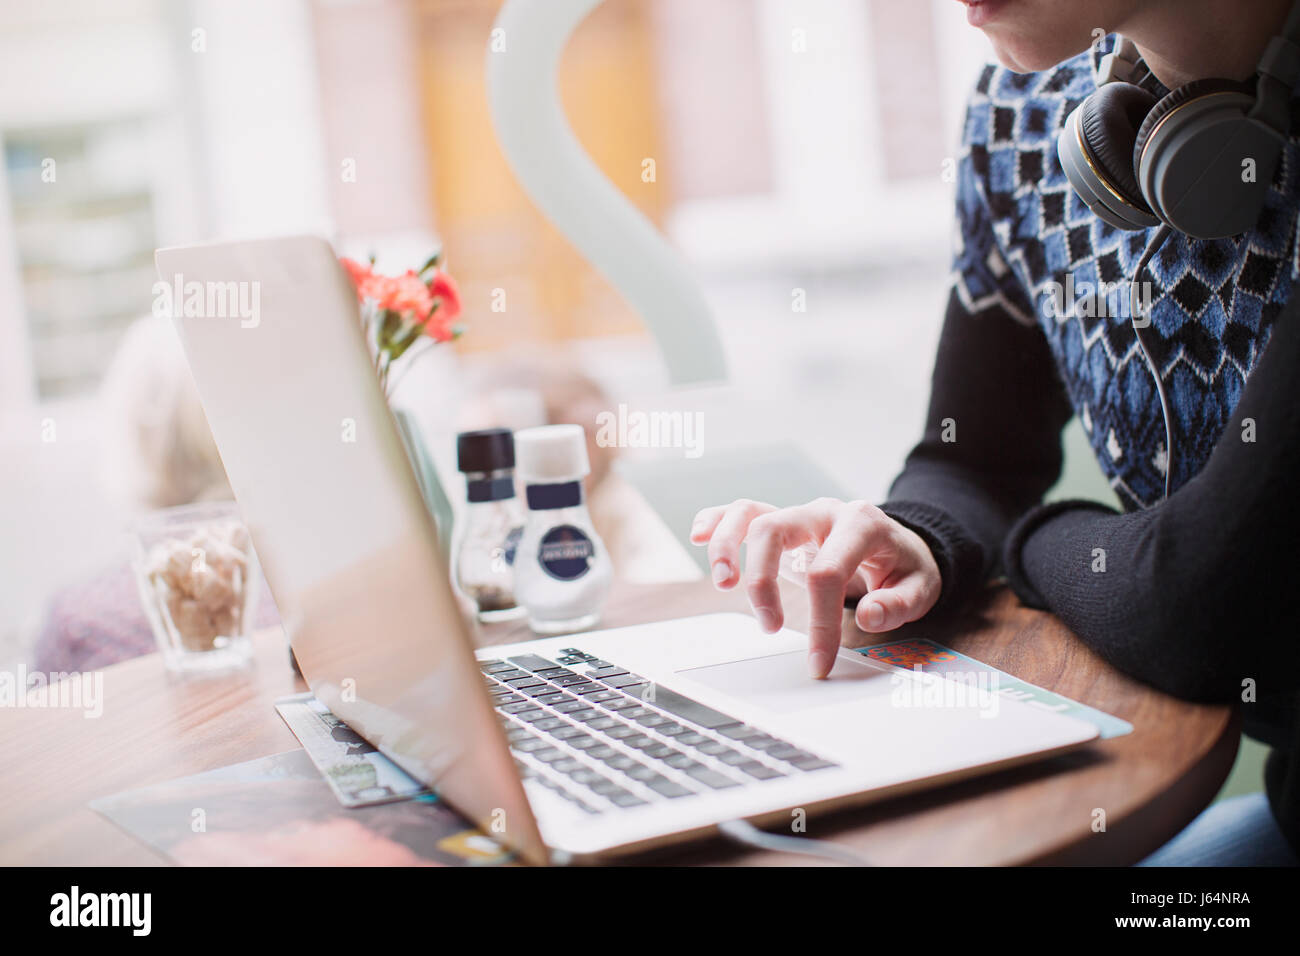 Woman using laptop at cafe window Stock Photo